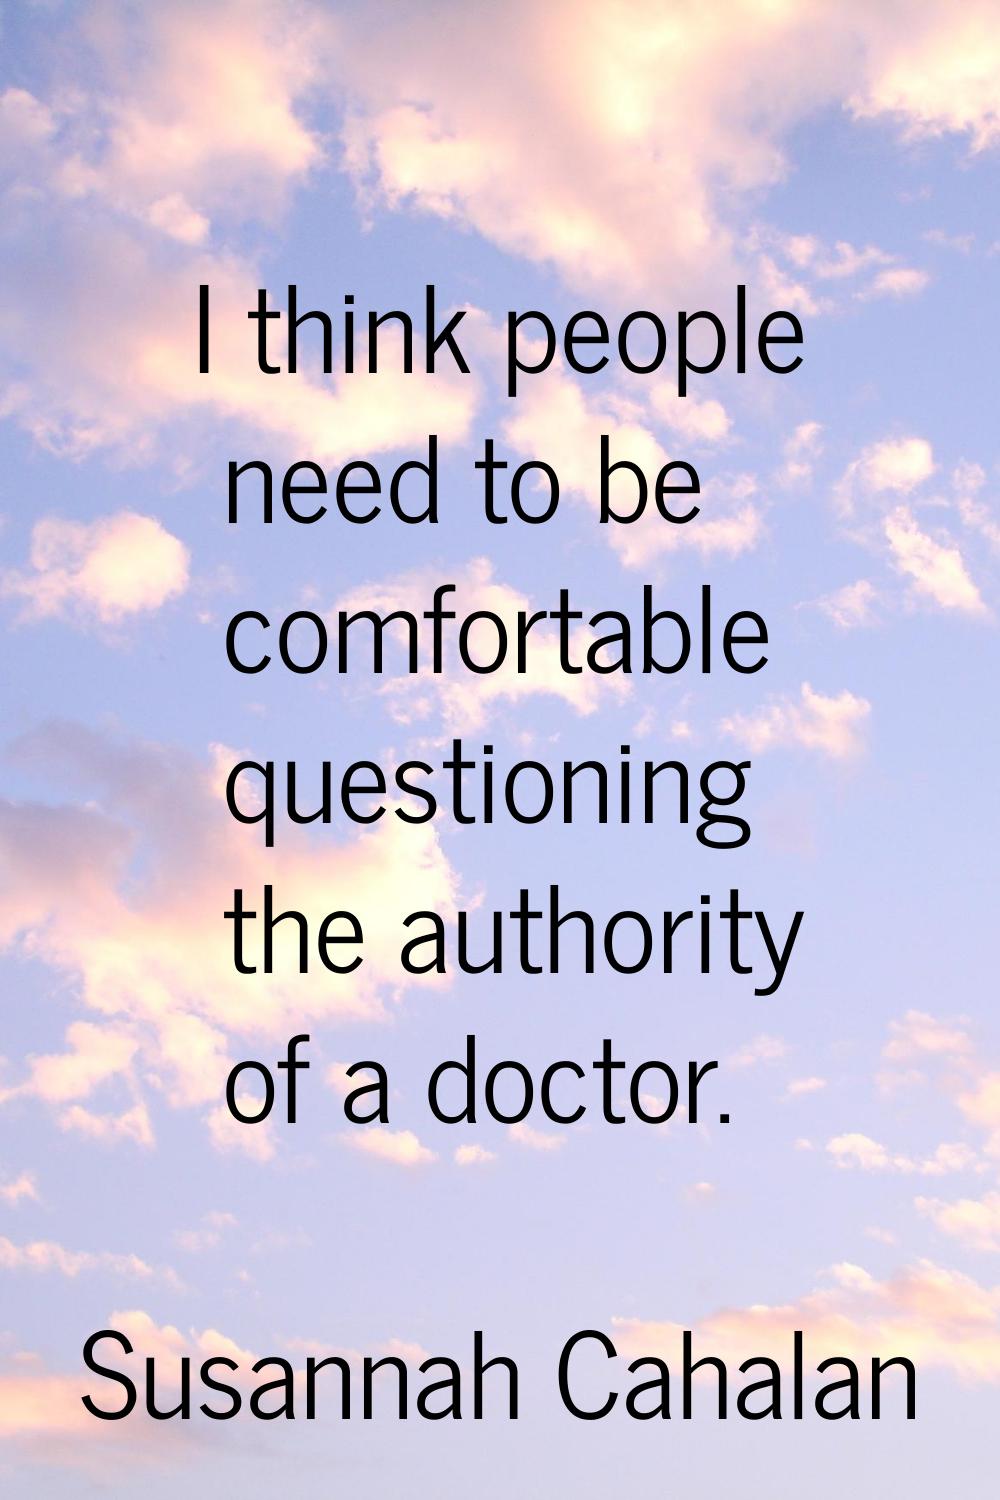 I think people need to be comfortable questioning the authority of a doctor.